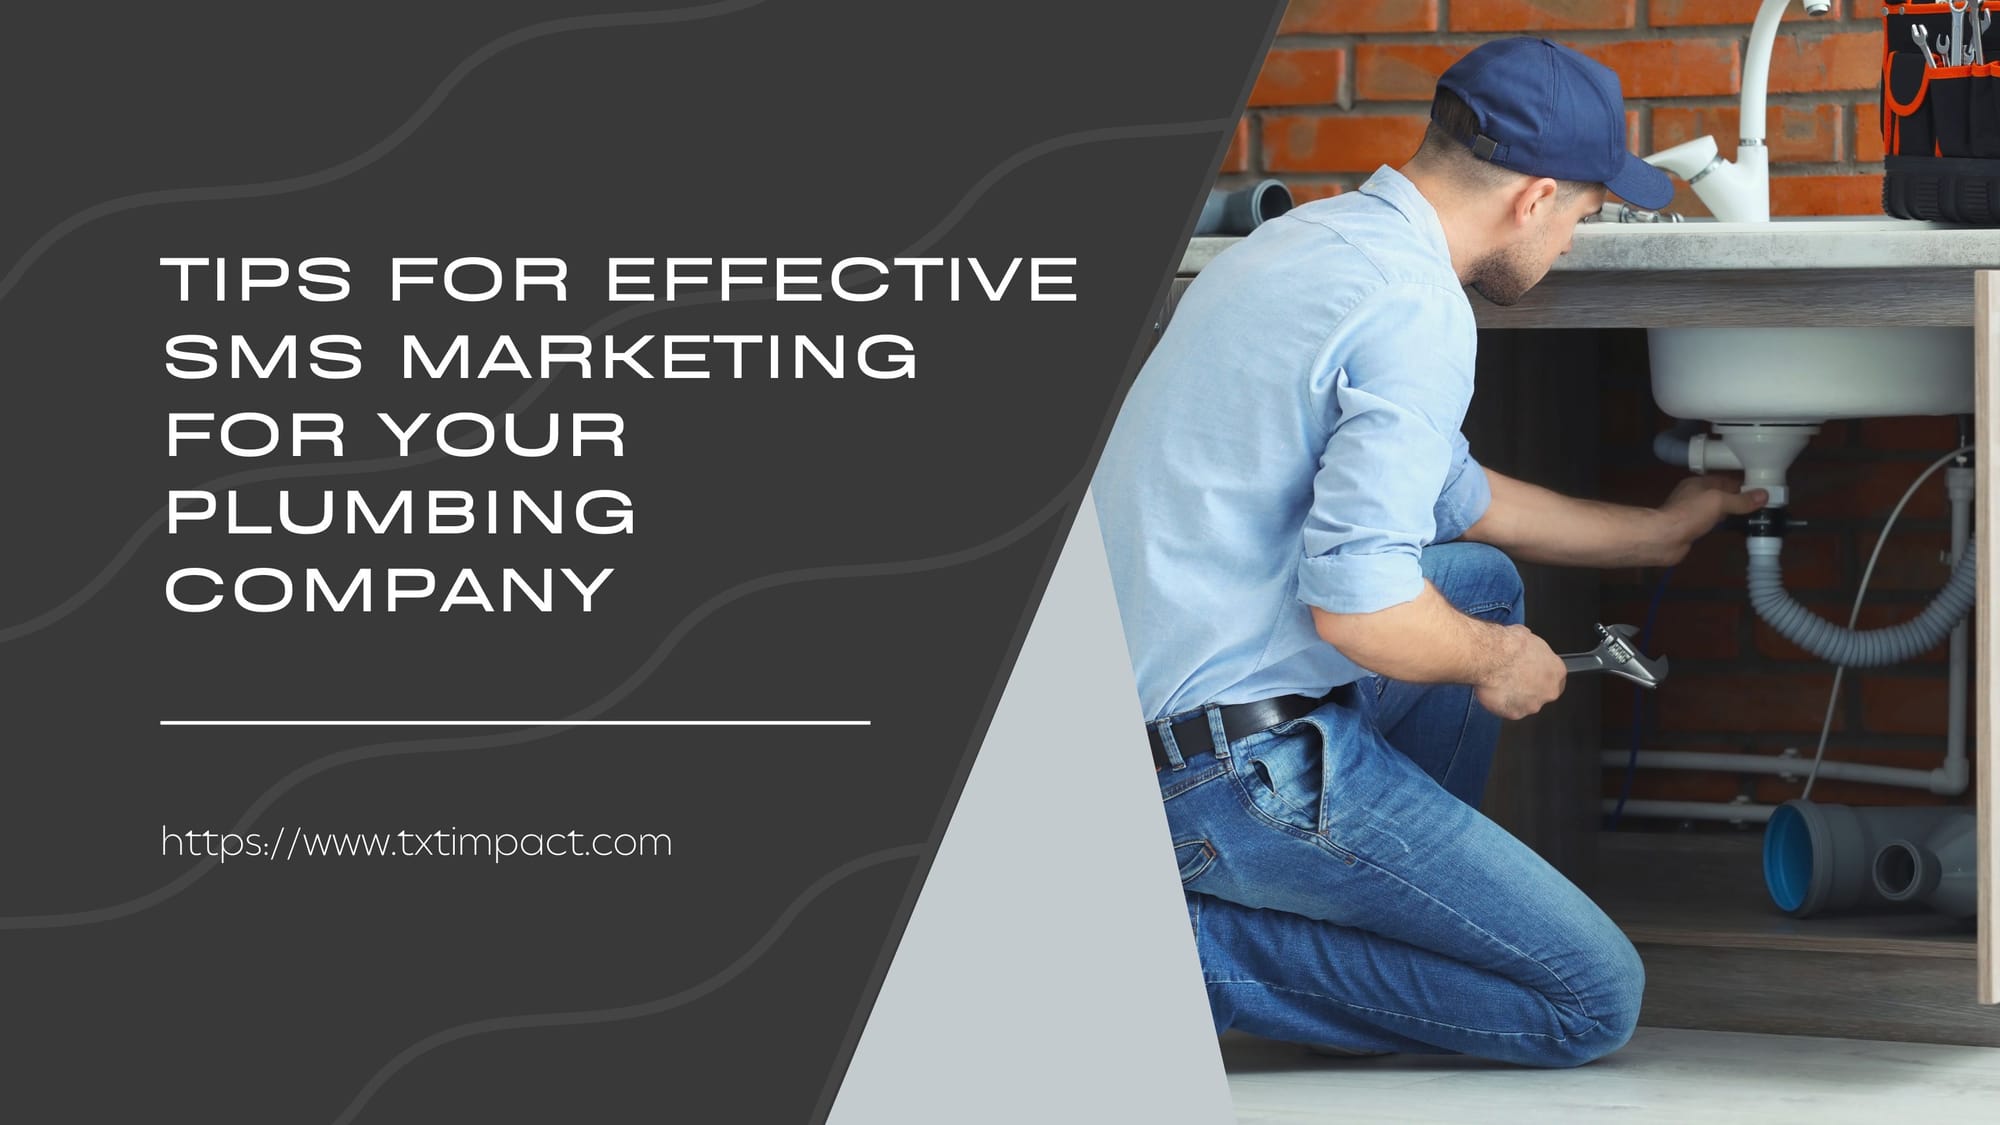 SMS Marketing for Your Plumbing Company.jpg